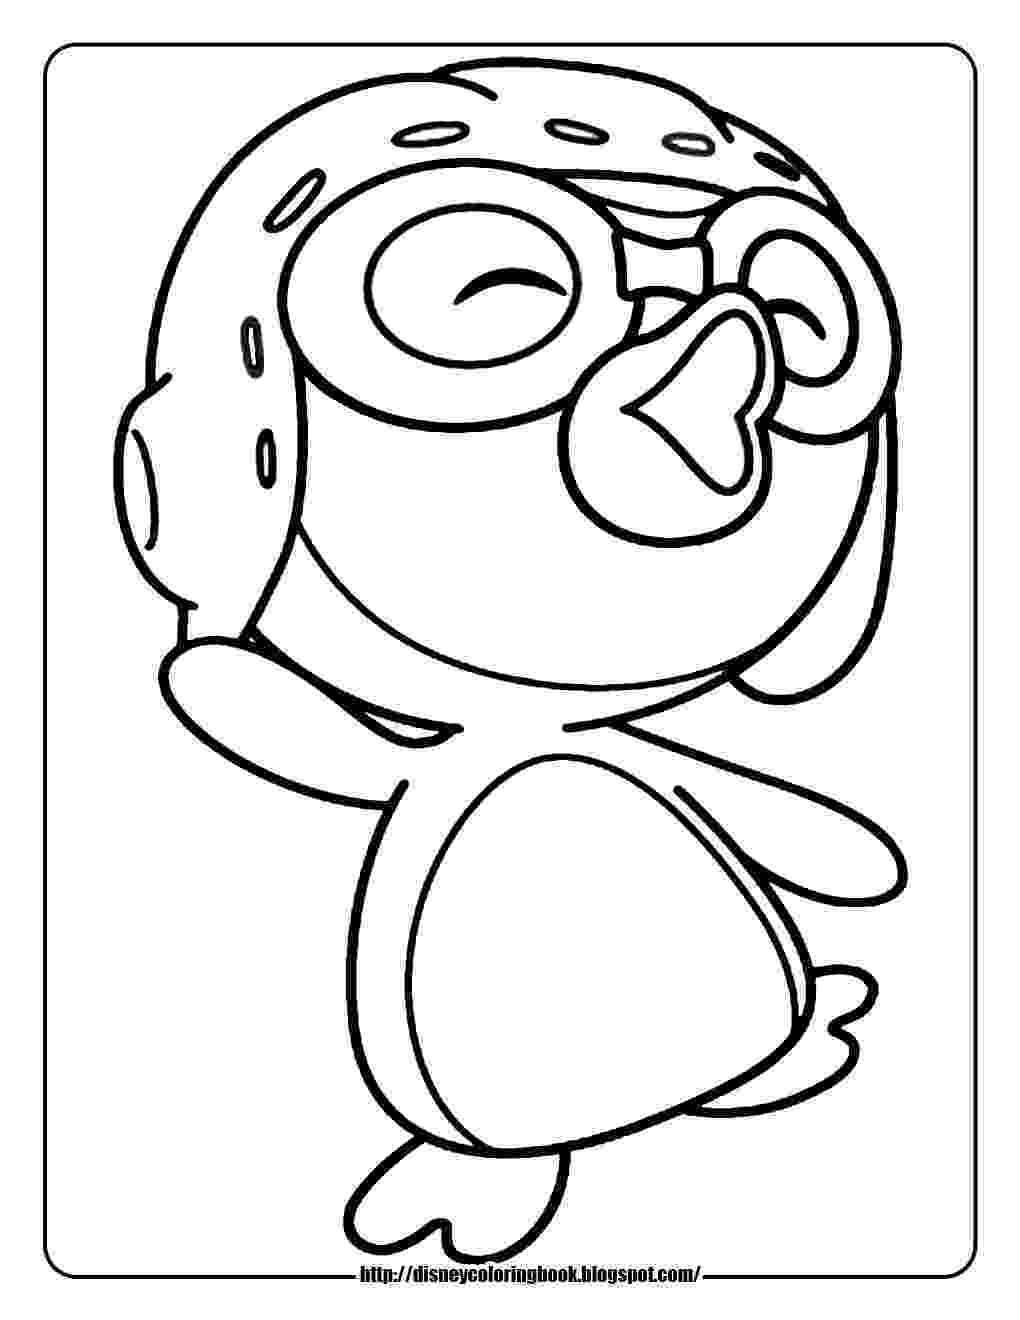 penguin images to color penguins coloring pages to download and print for free to images color penguin 